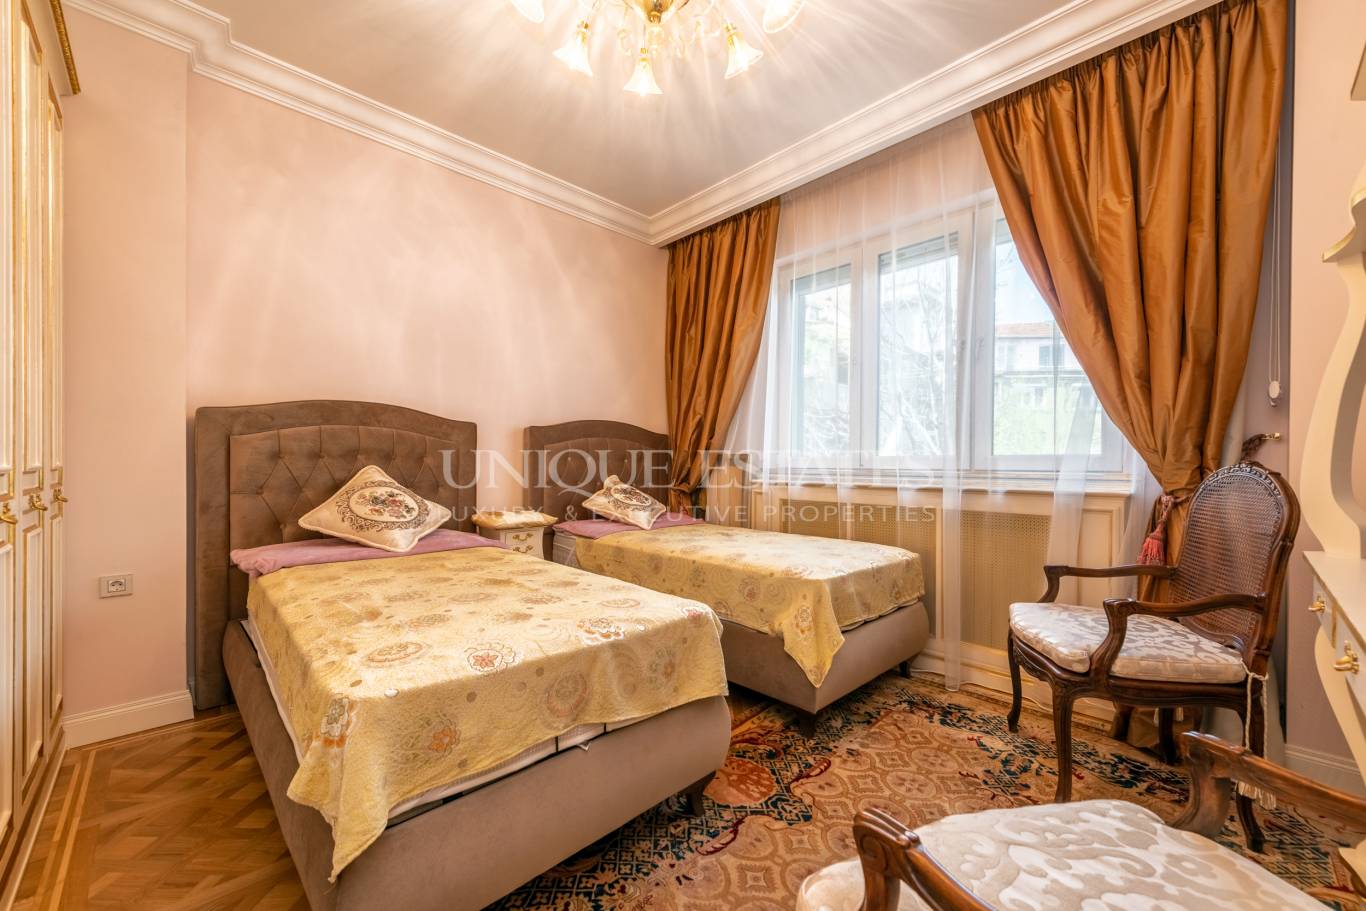 Apartment for sale in Sofia, Downtown with listing ID: K9230 - image 10